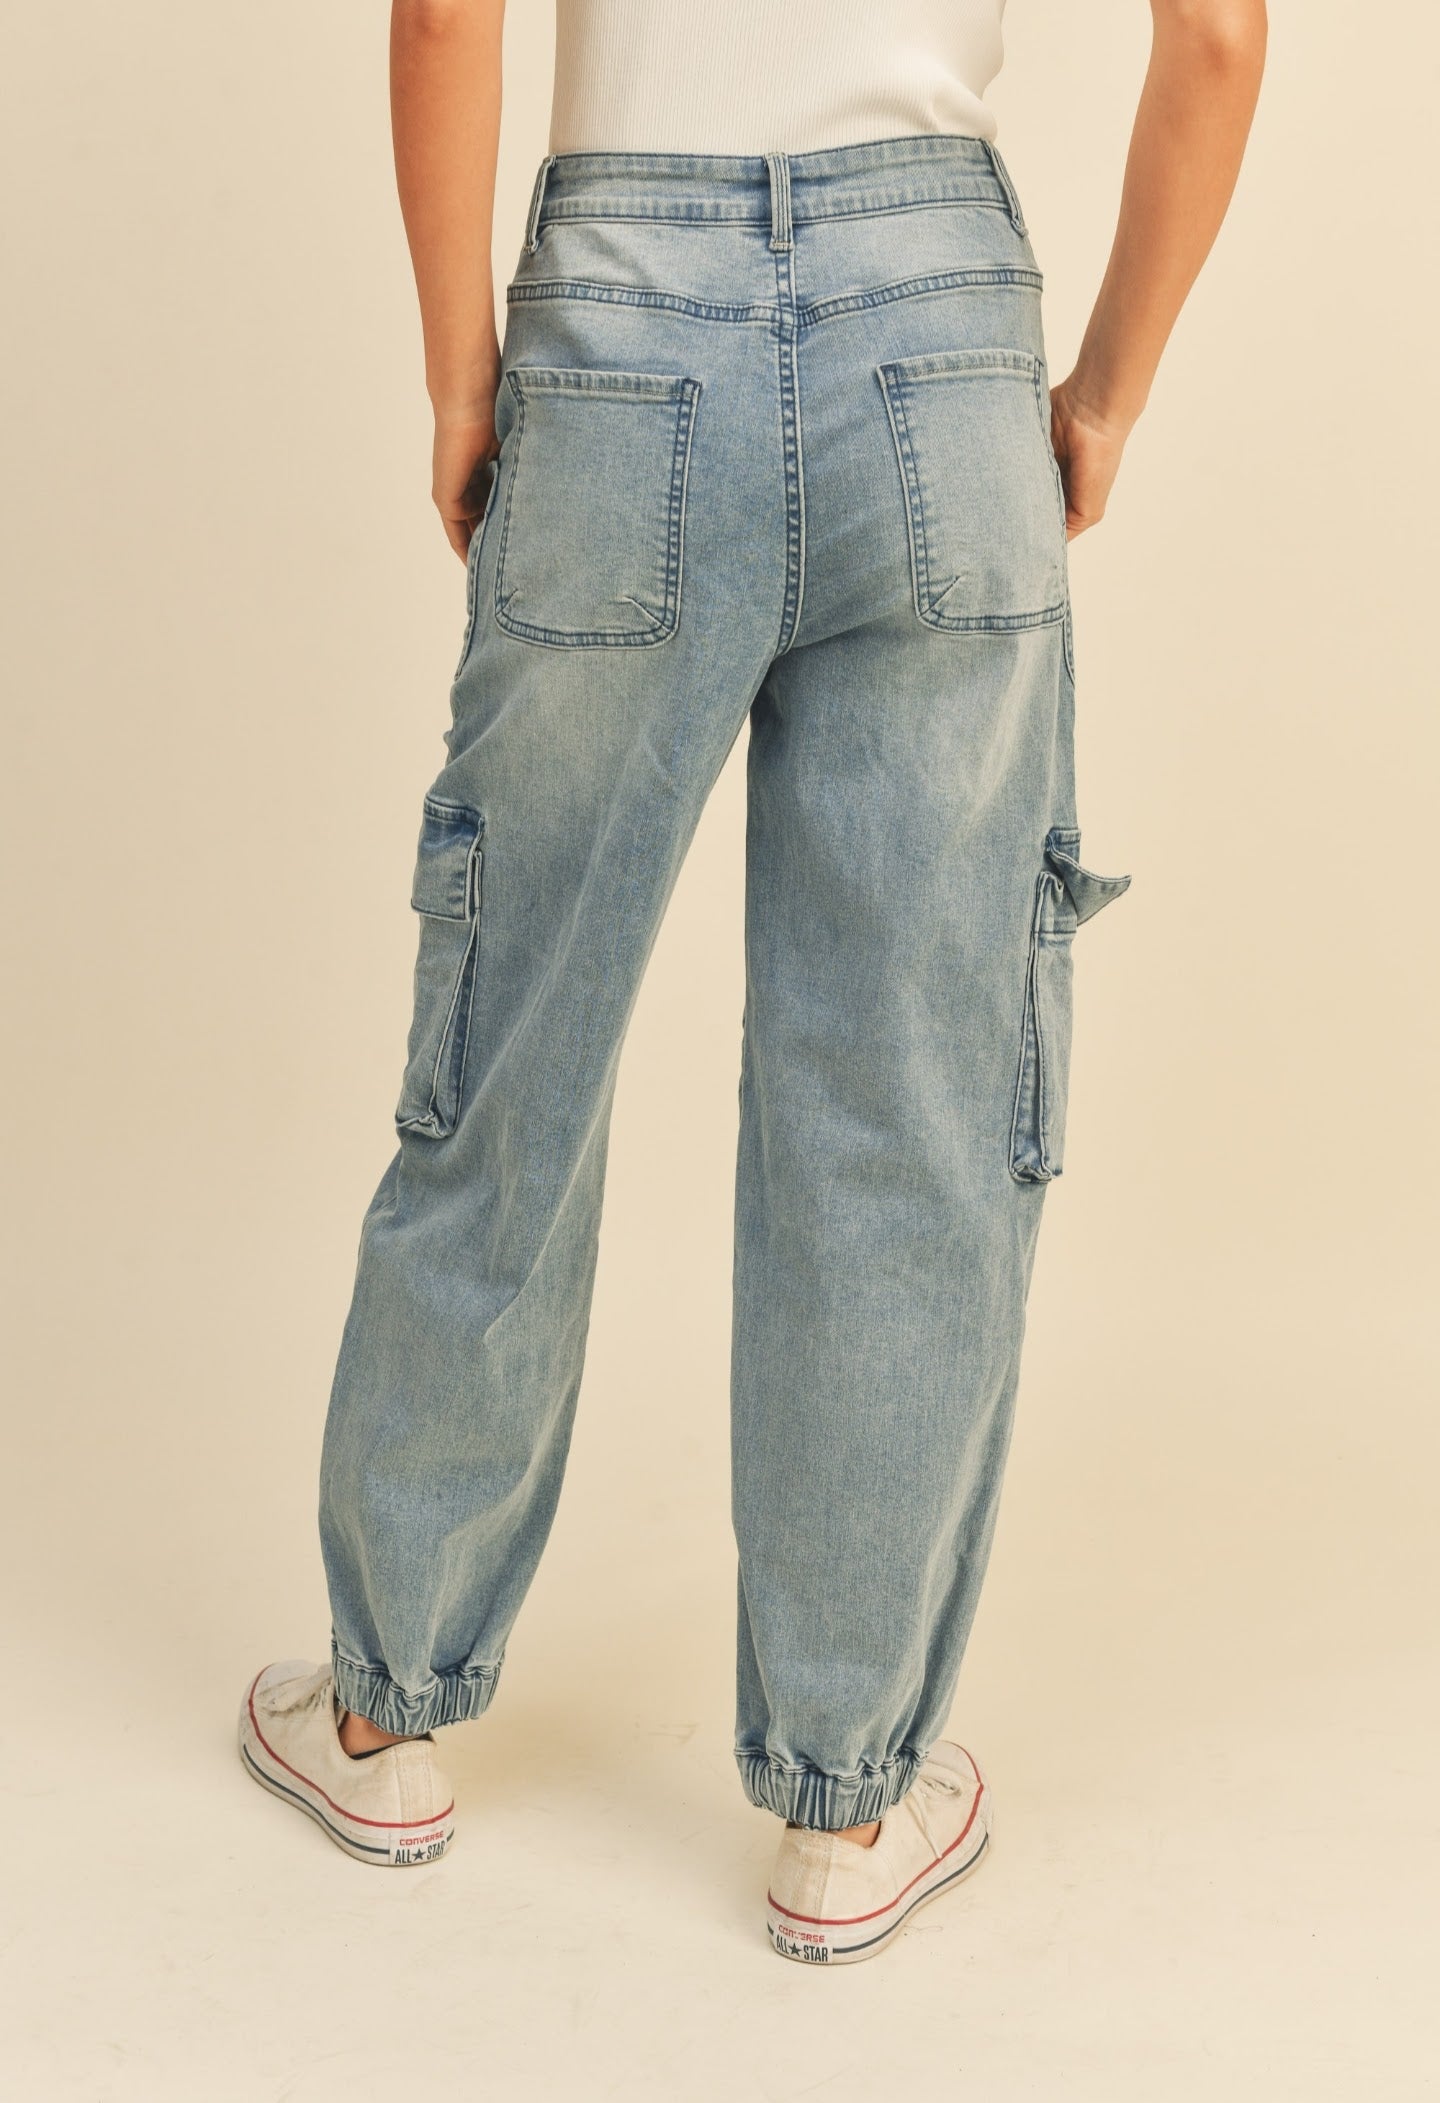 The Washed Denim Cargo Pants